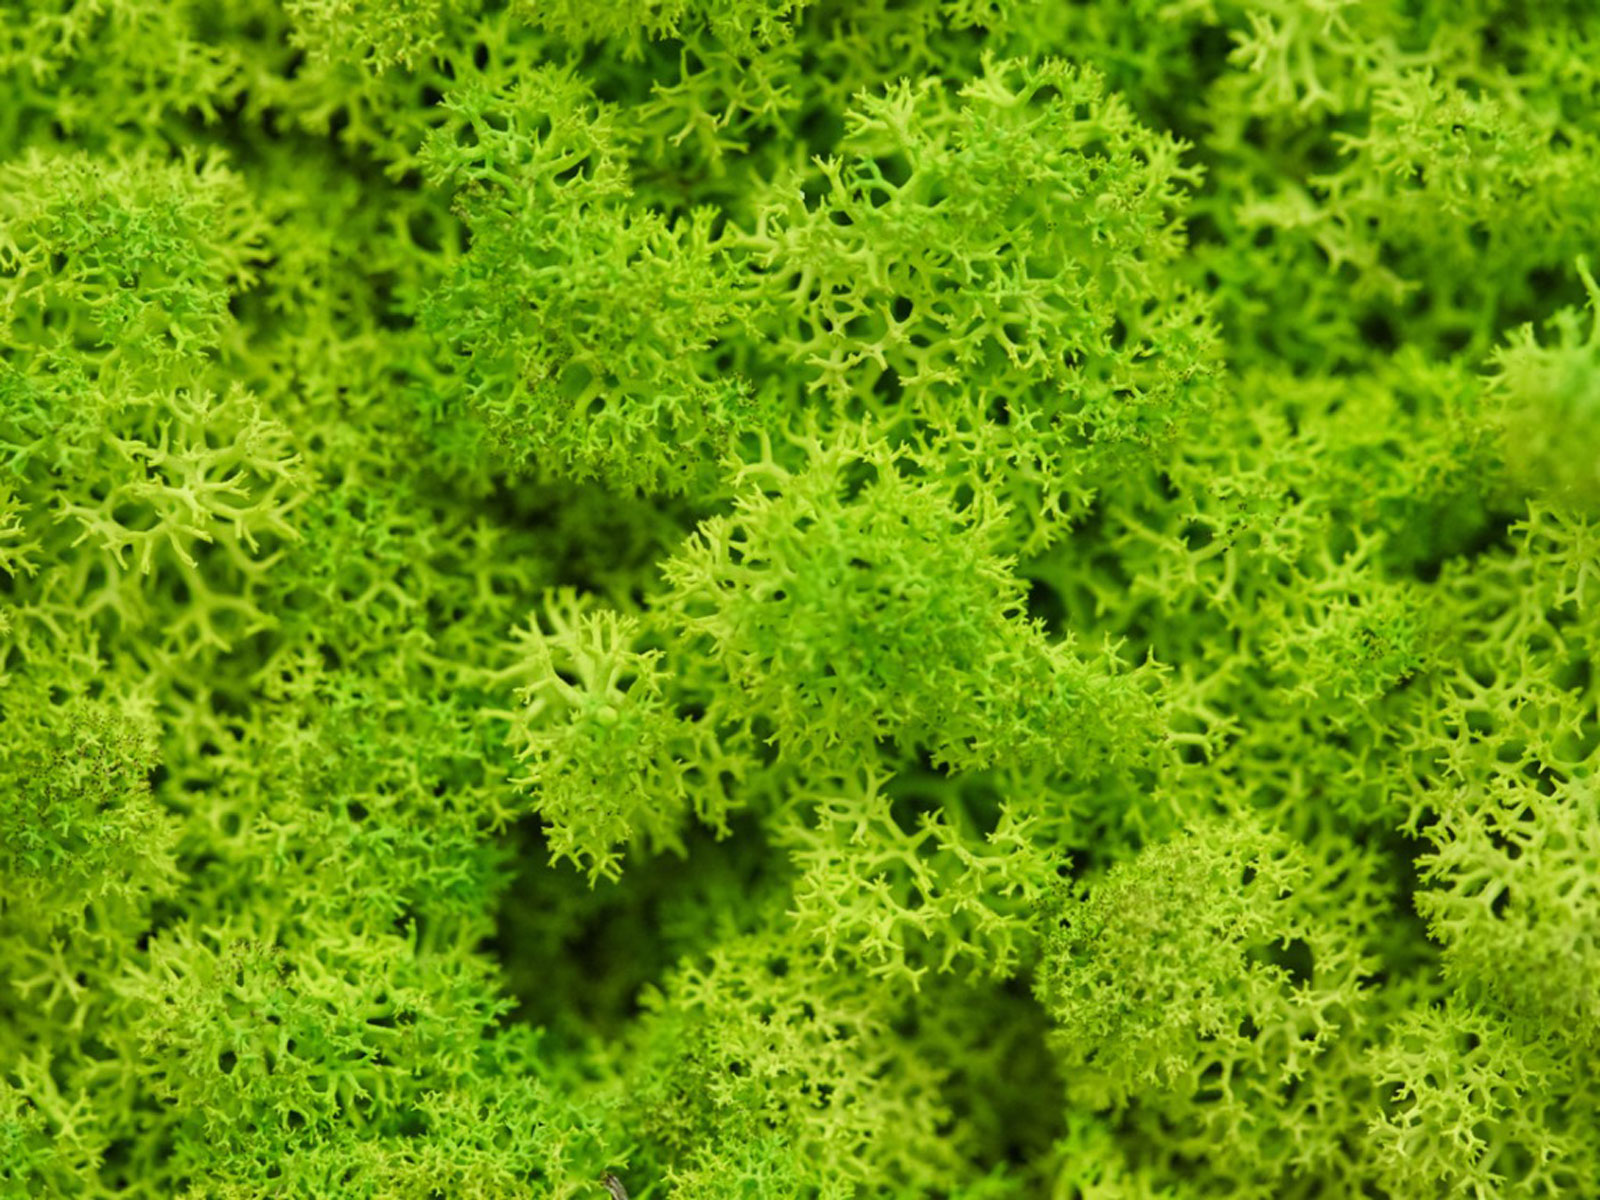 Moss can be a temporary problem following drought or waterlogging